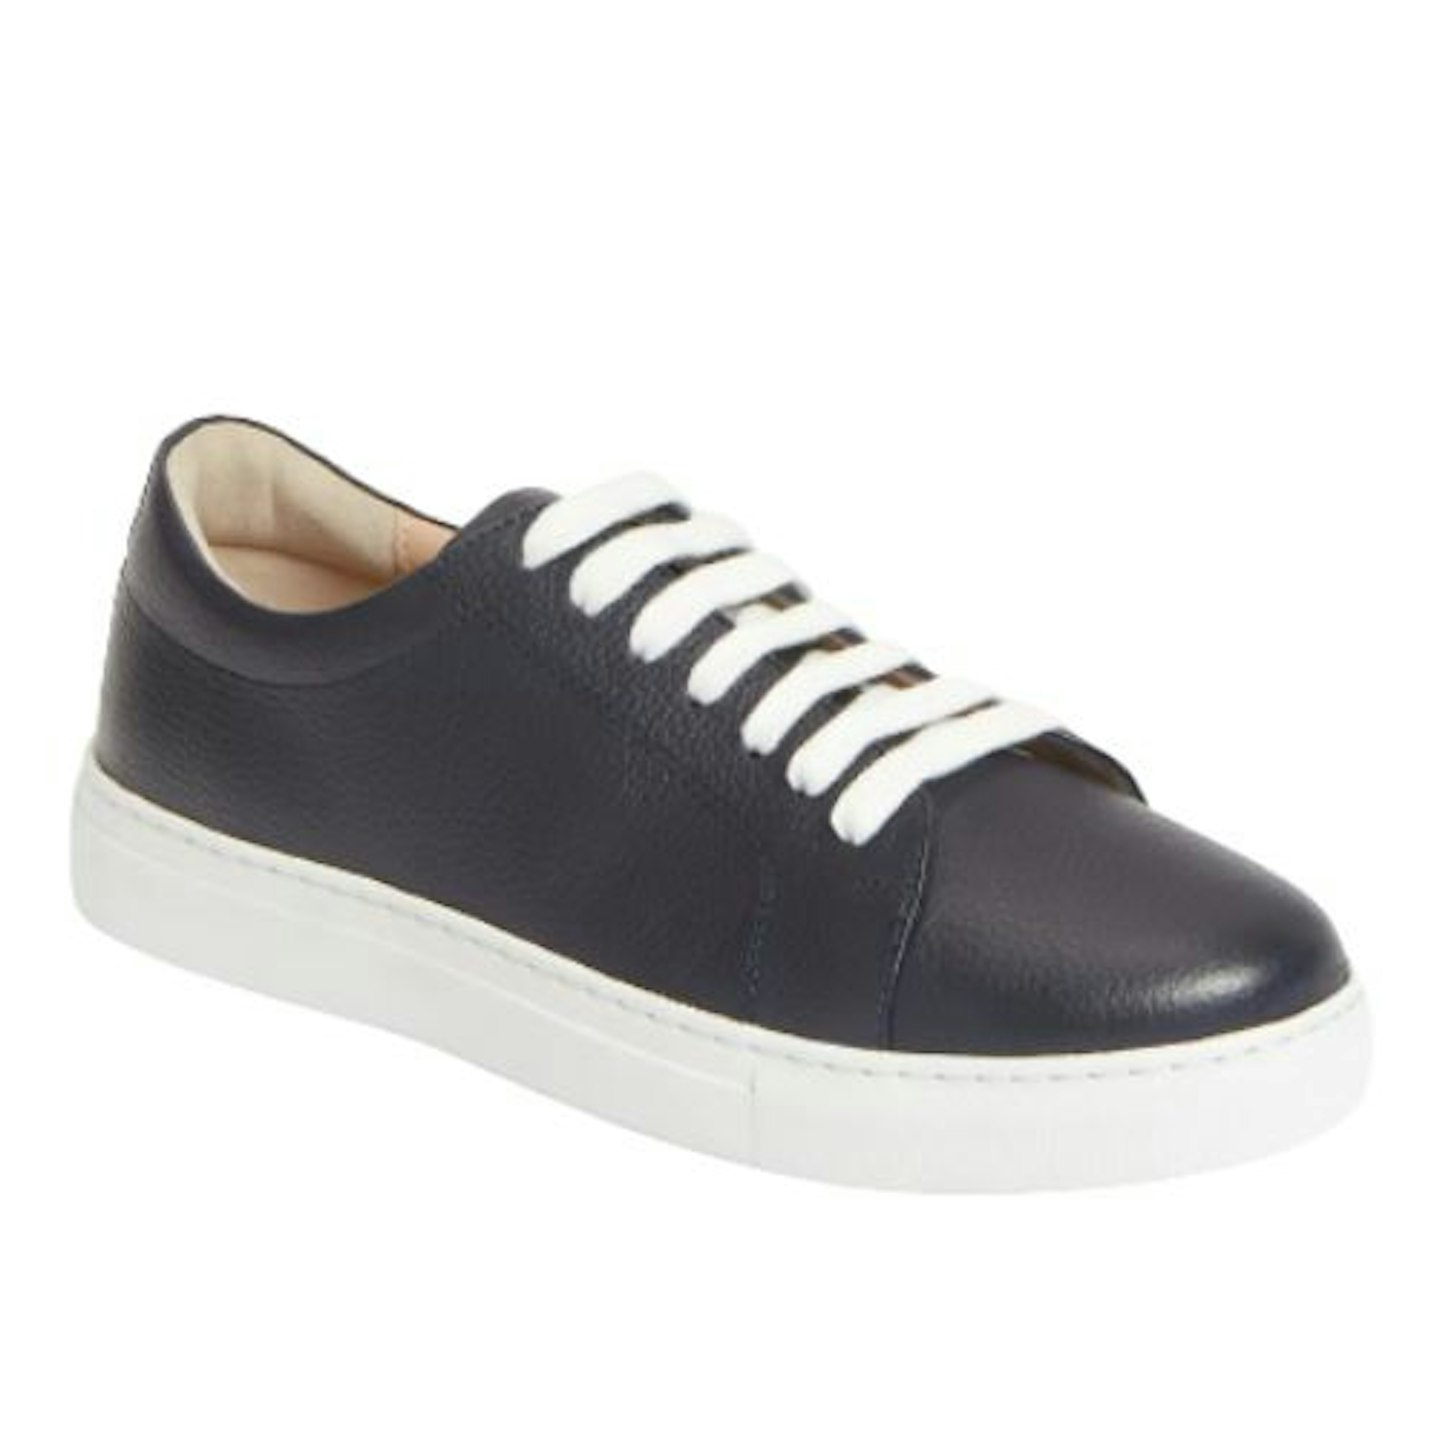 John Lewis Florette Wide Fit Leather Trainers